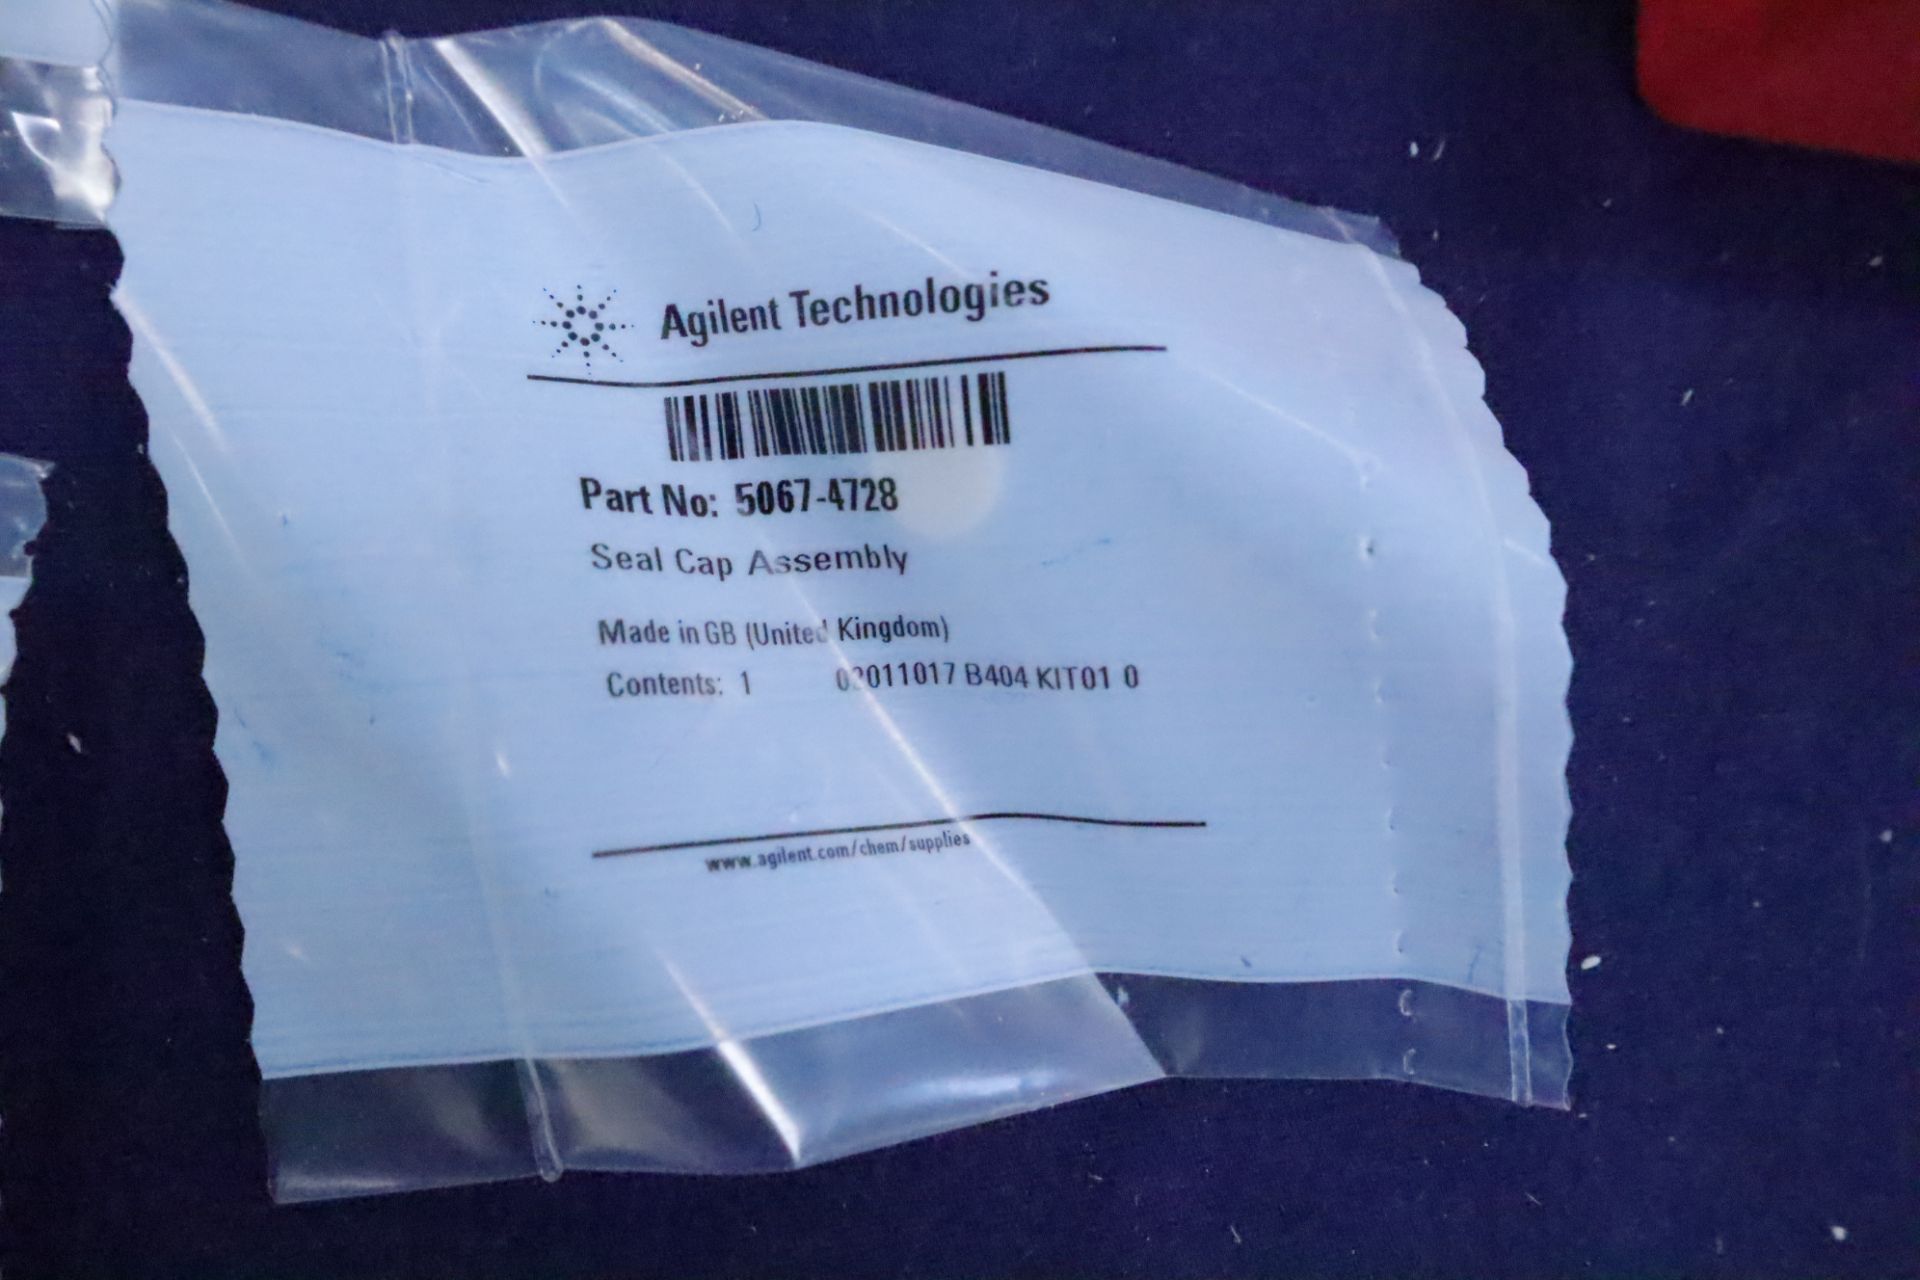 (NIB) Agilent Technologies OEM Replacement Parts for LC/MS Machines - Image 24 of 24